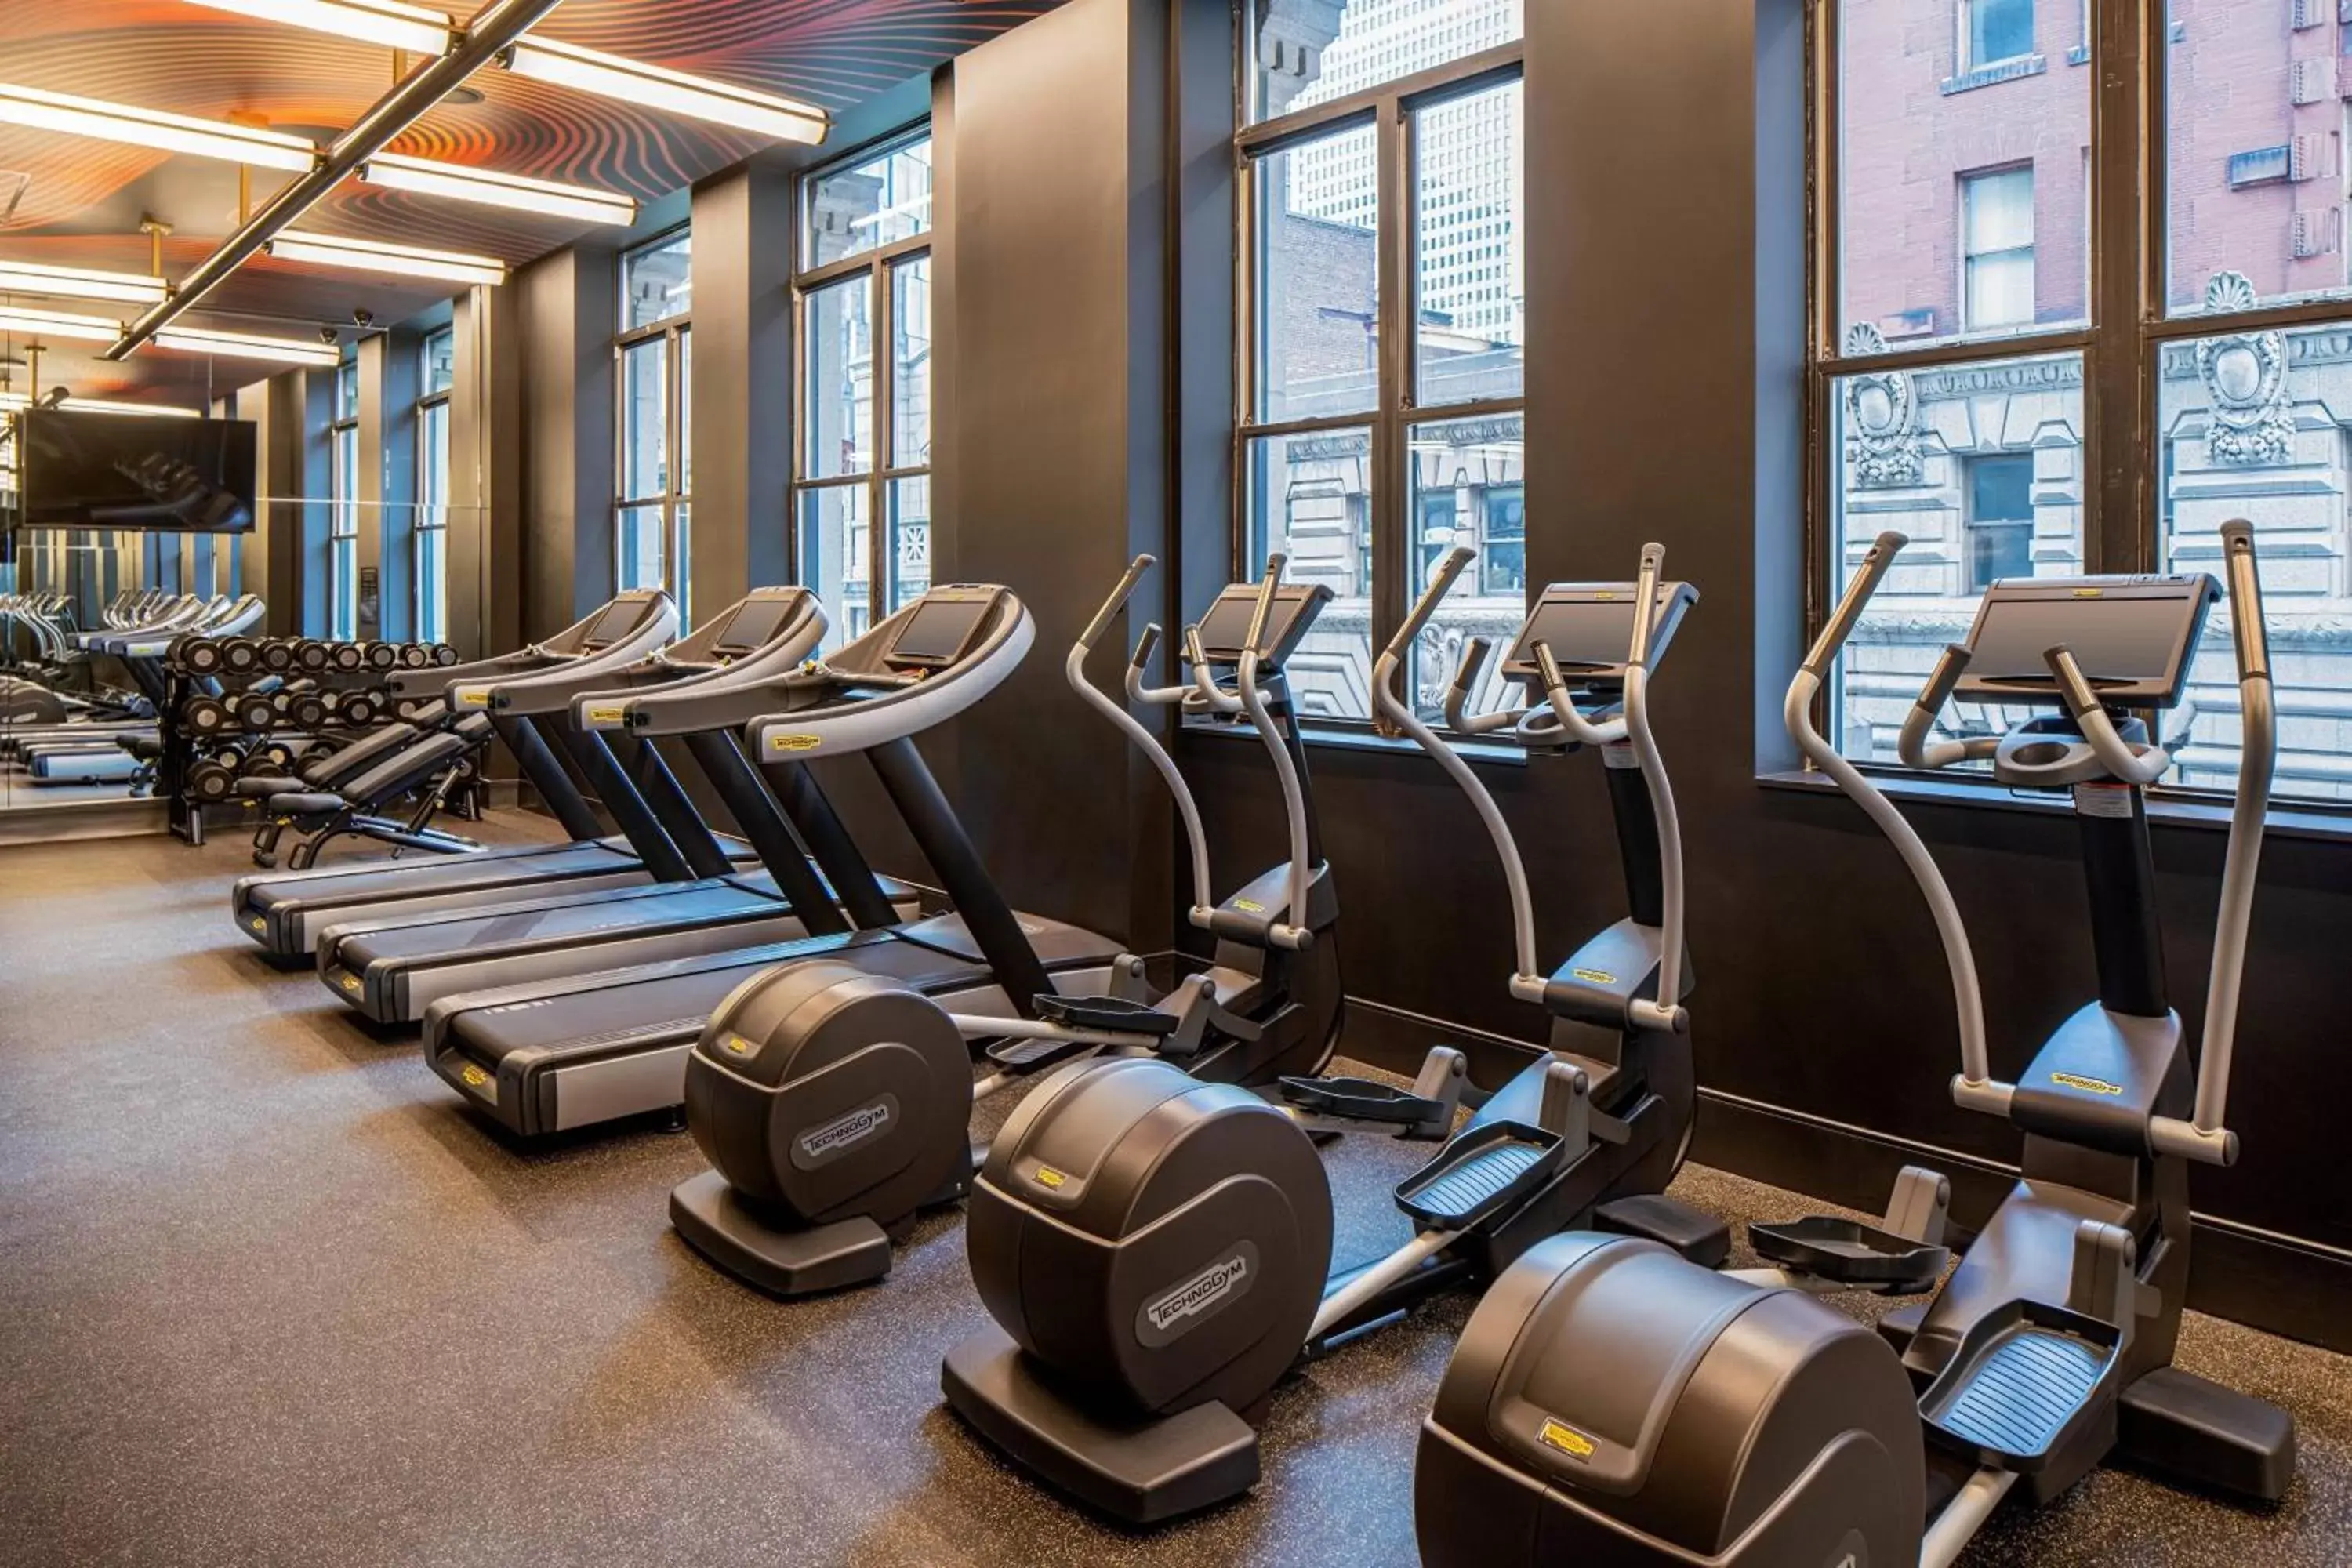 Fitness centre/facilities, Fitness Center/Facilities in The Industrialist Hotel, Pittsburgh, Autograph Collection